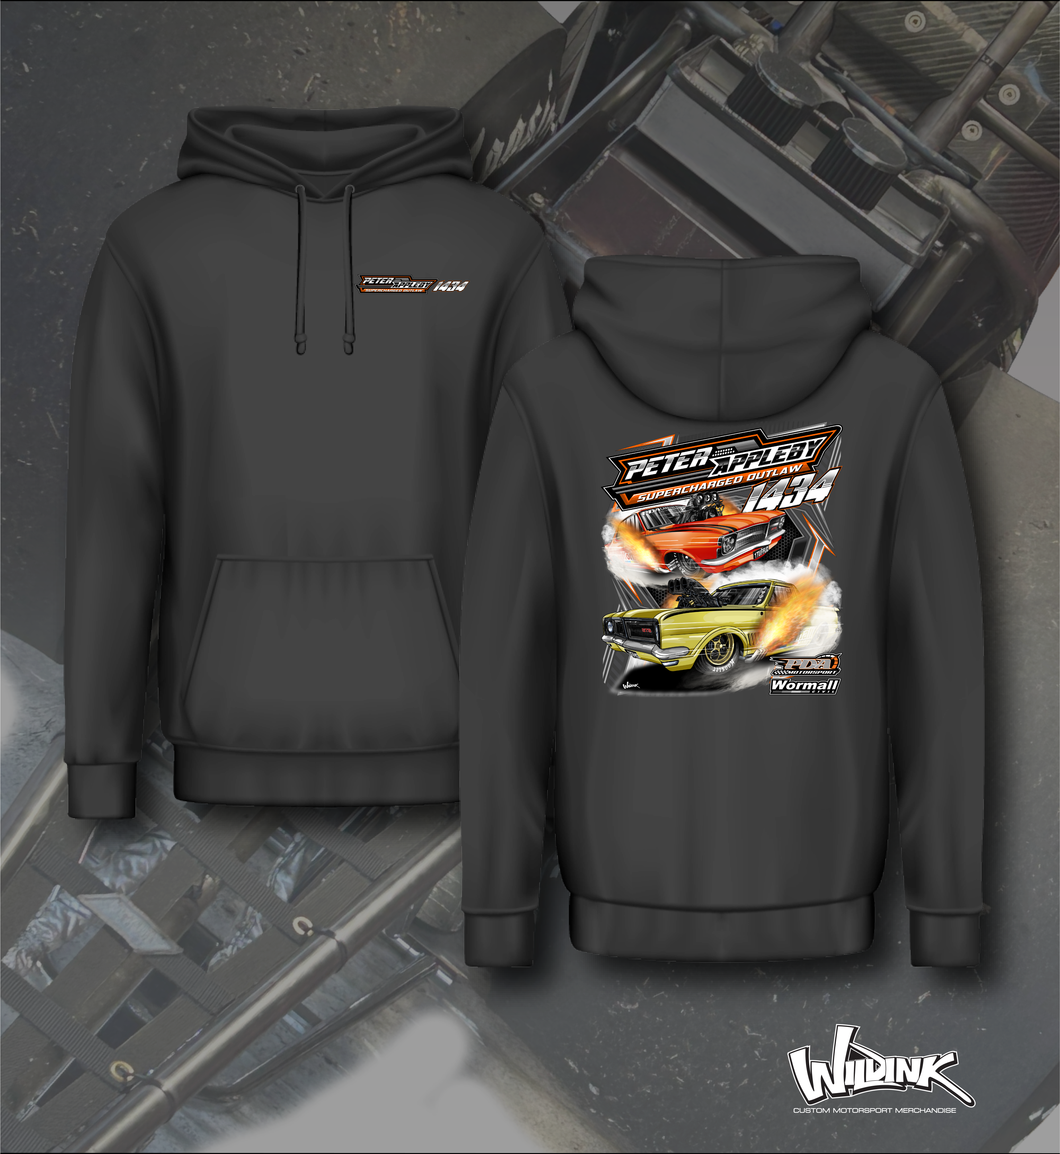 Peter Appleby - PDA Motorsport - Supercharged Outlaw - Hoodie